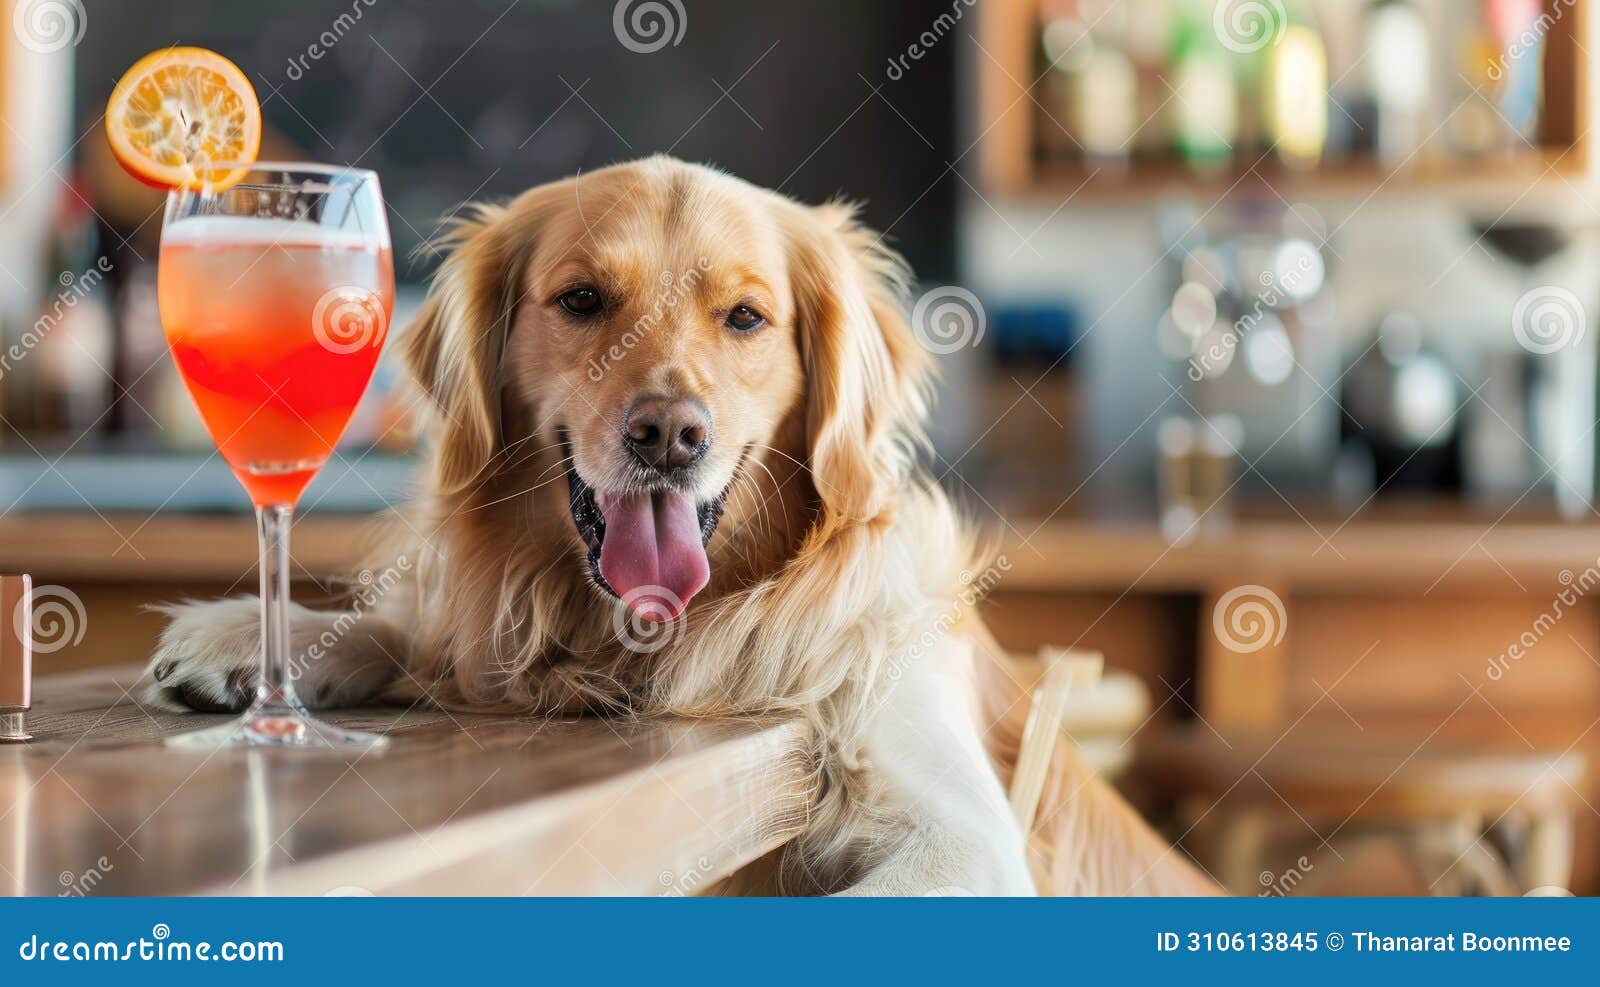 inebriated dog enjoys cocktail, ai generated